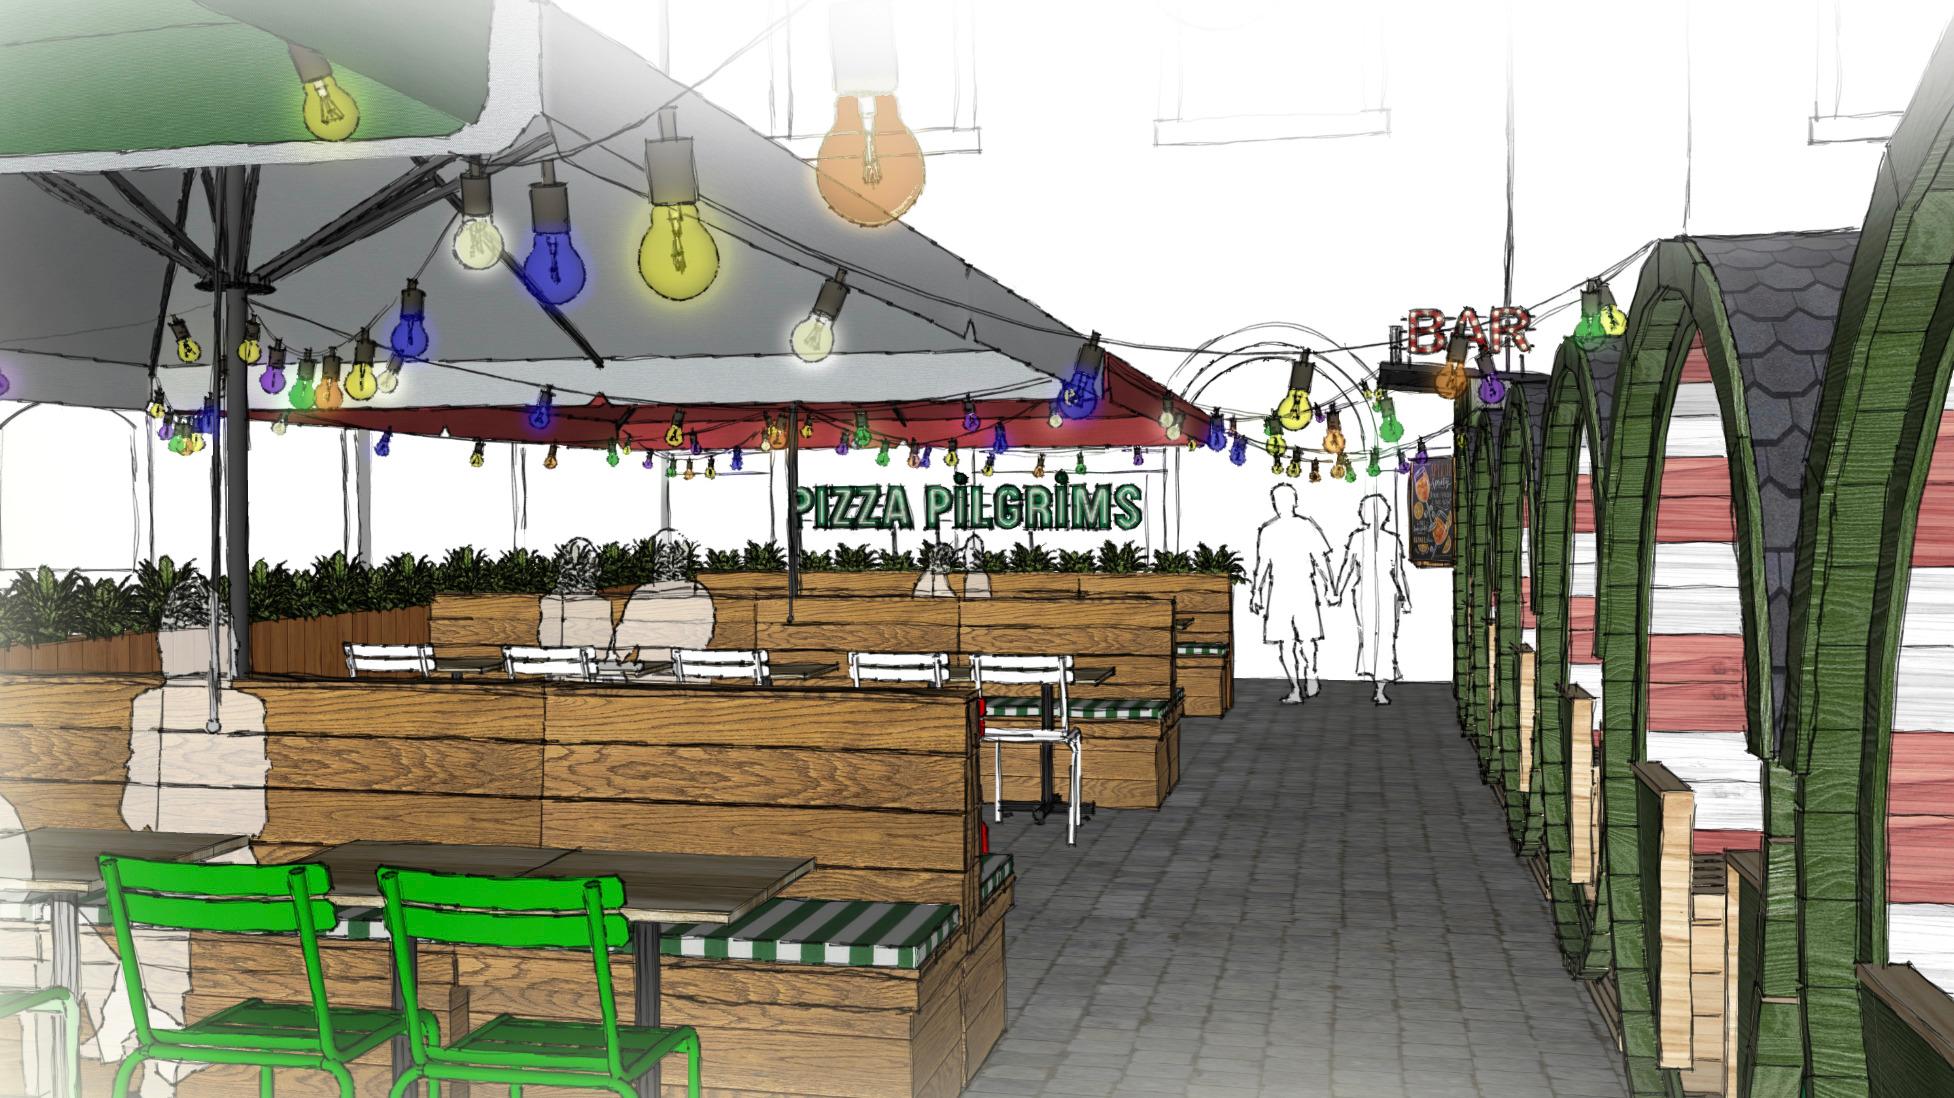 Coming Soon - Sunny Quay Side Terrace Summer Parties!, Pizza Pilgrims Canary Wharf photo #2